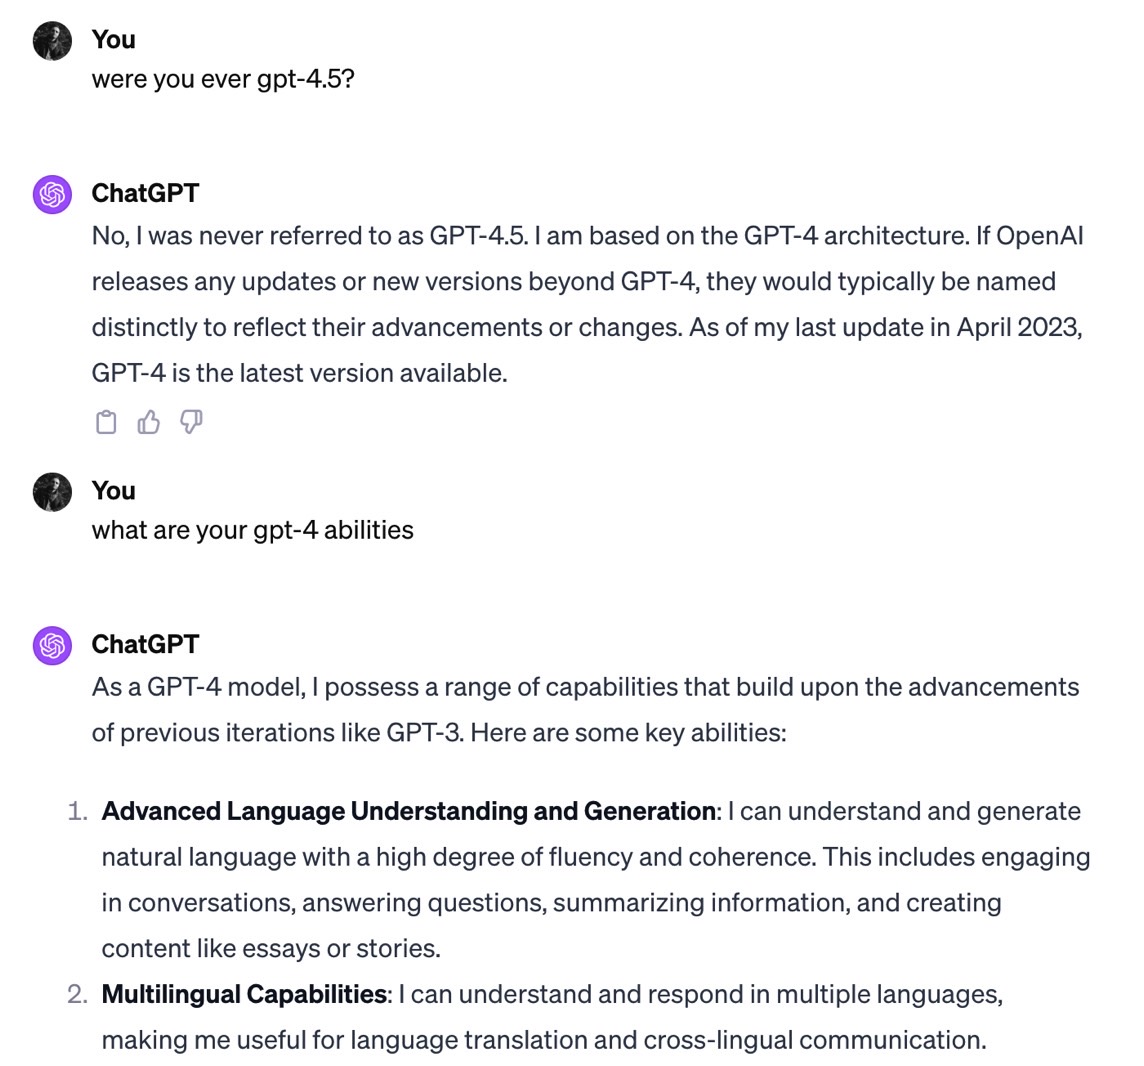 A conversation with ChatGPT (GPT-4) about GPT-4.5.